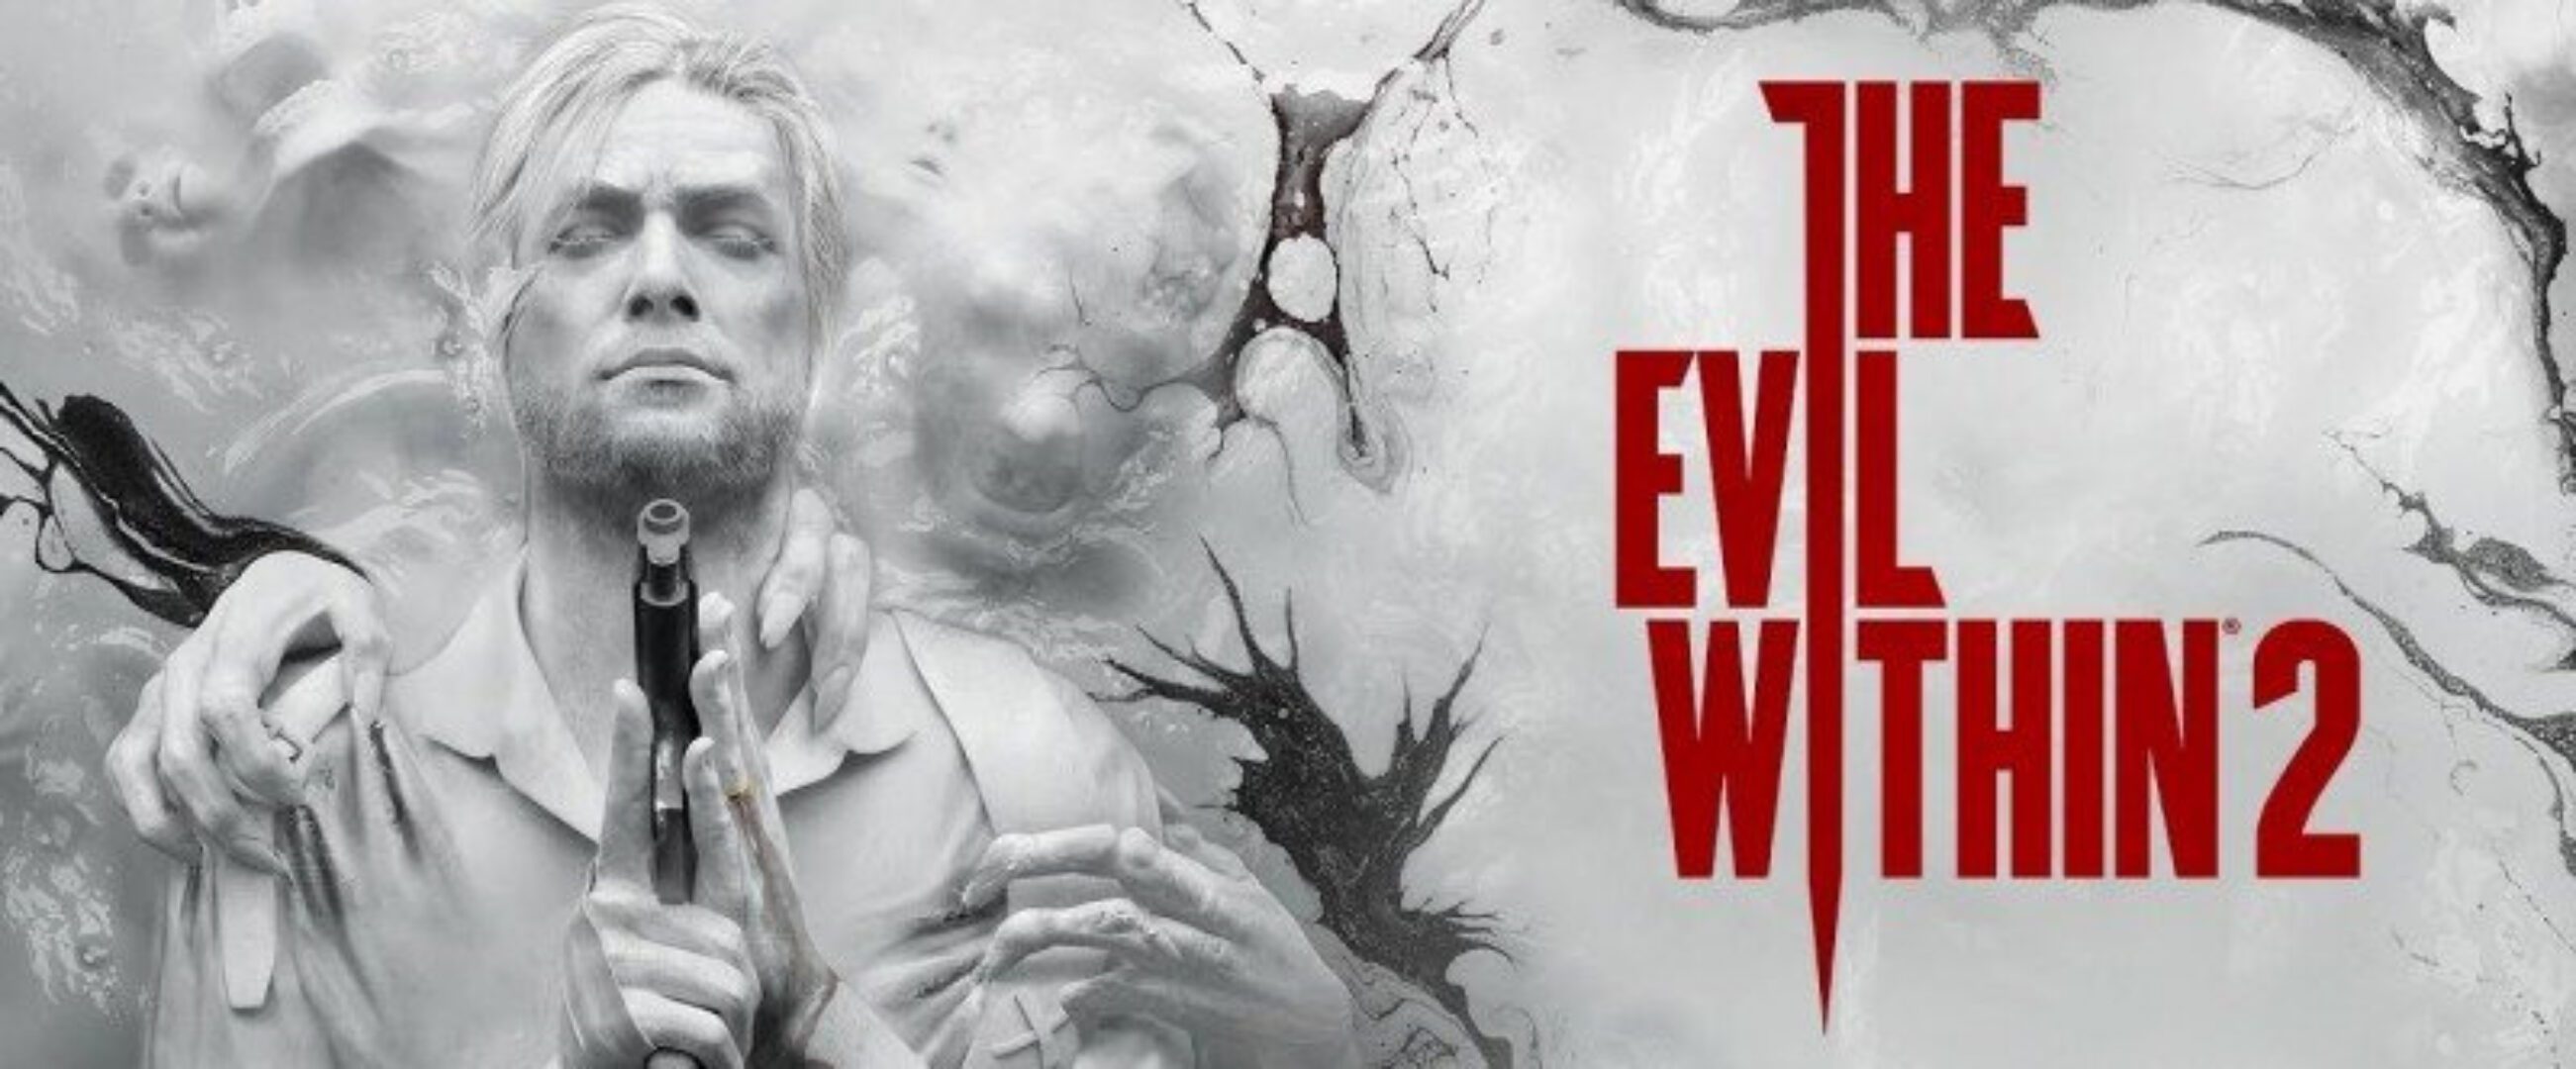 New The Evil Within 2 Trailer Introduces the Wrathful, “Righteous” Priest